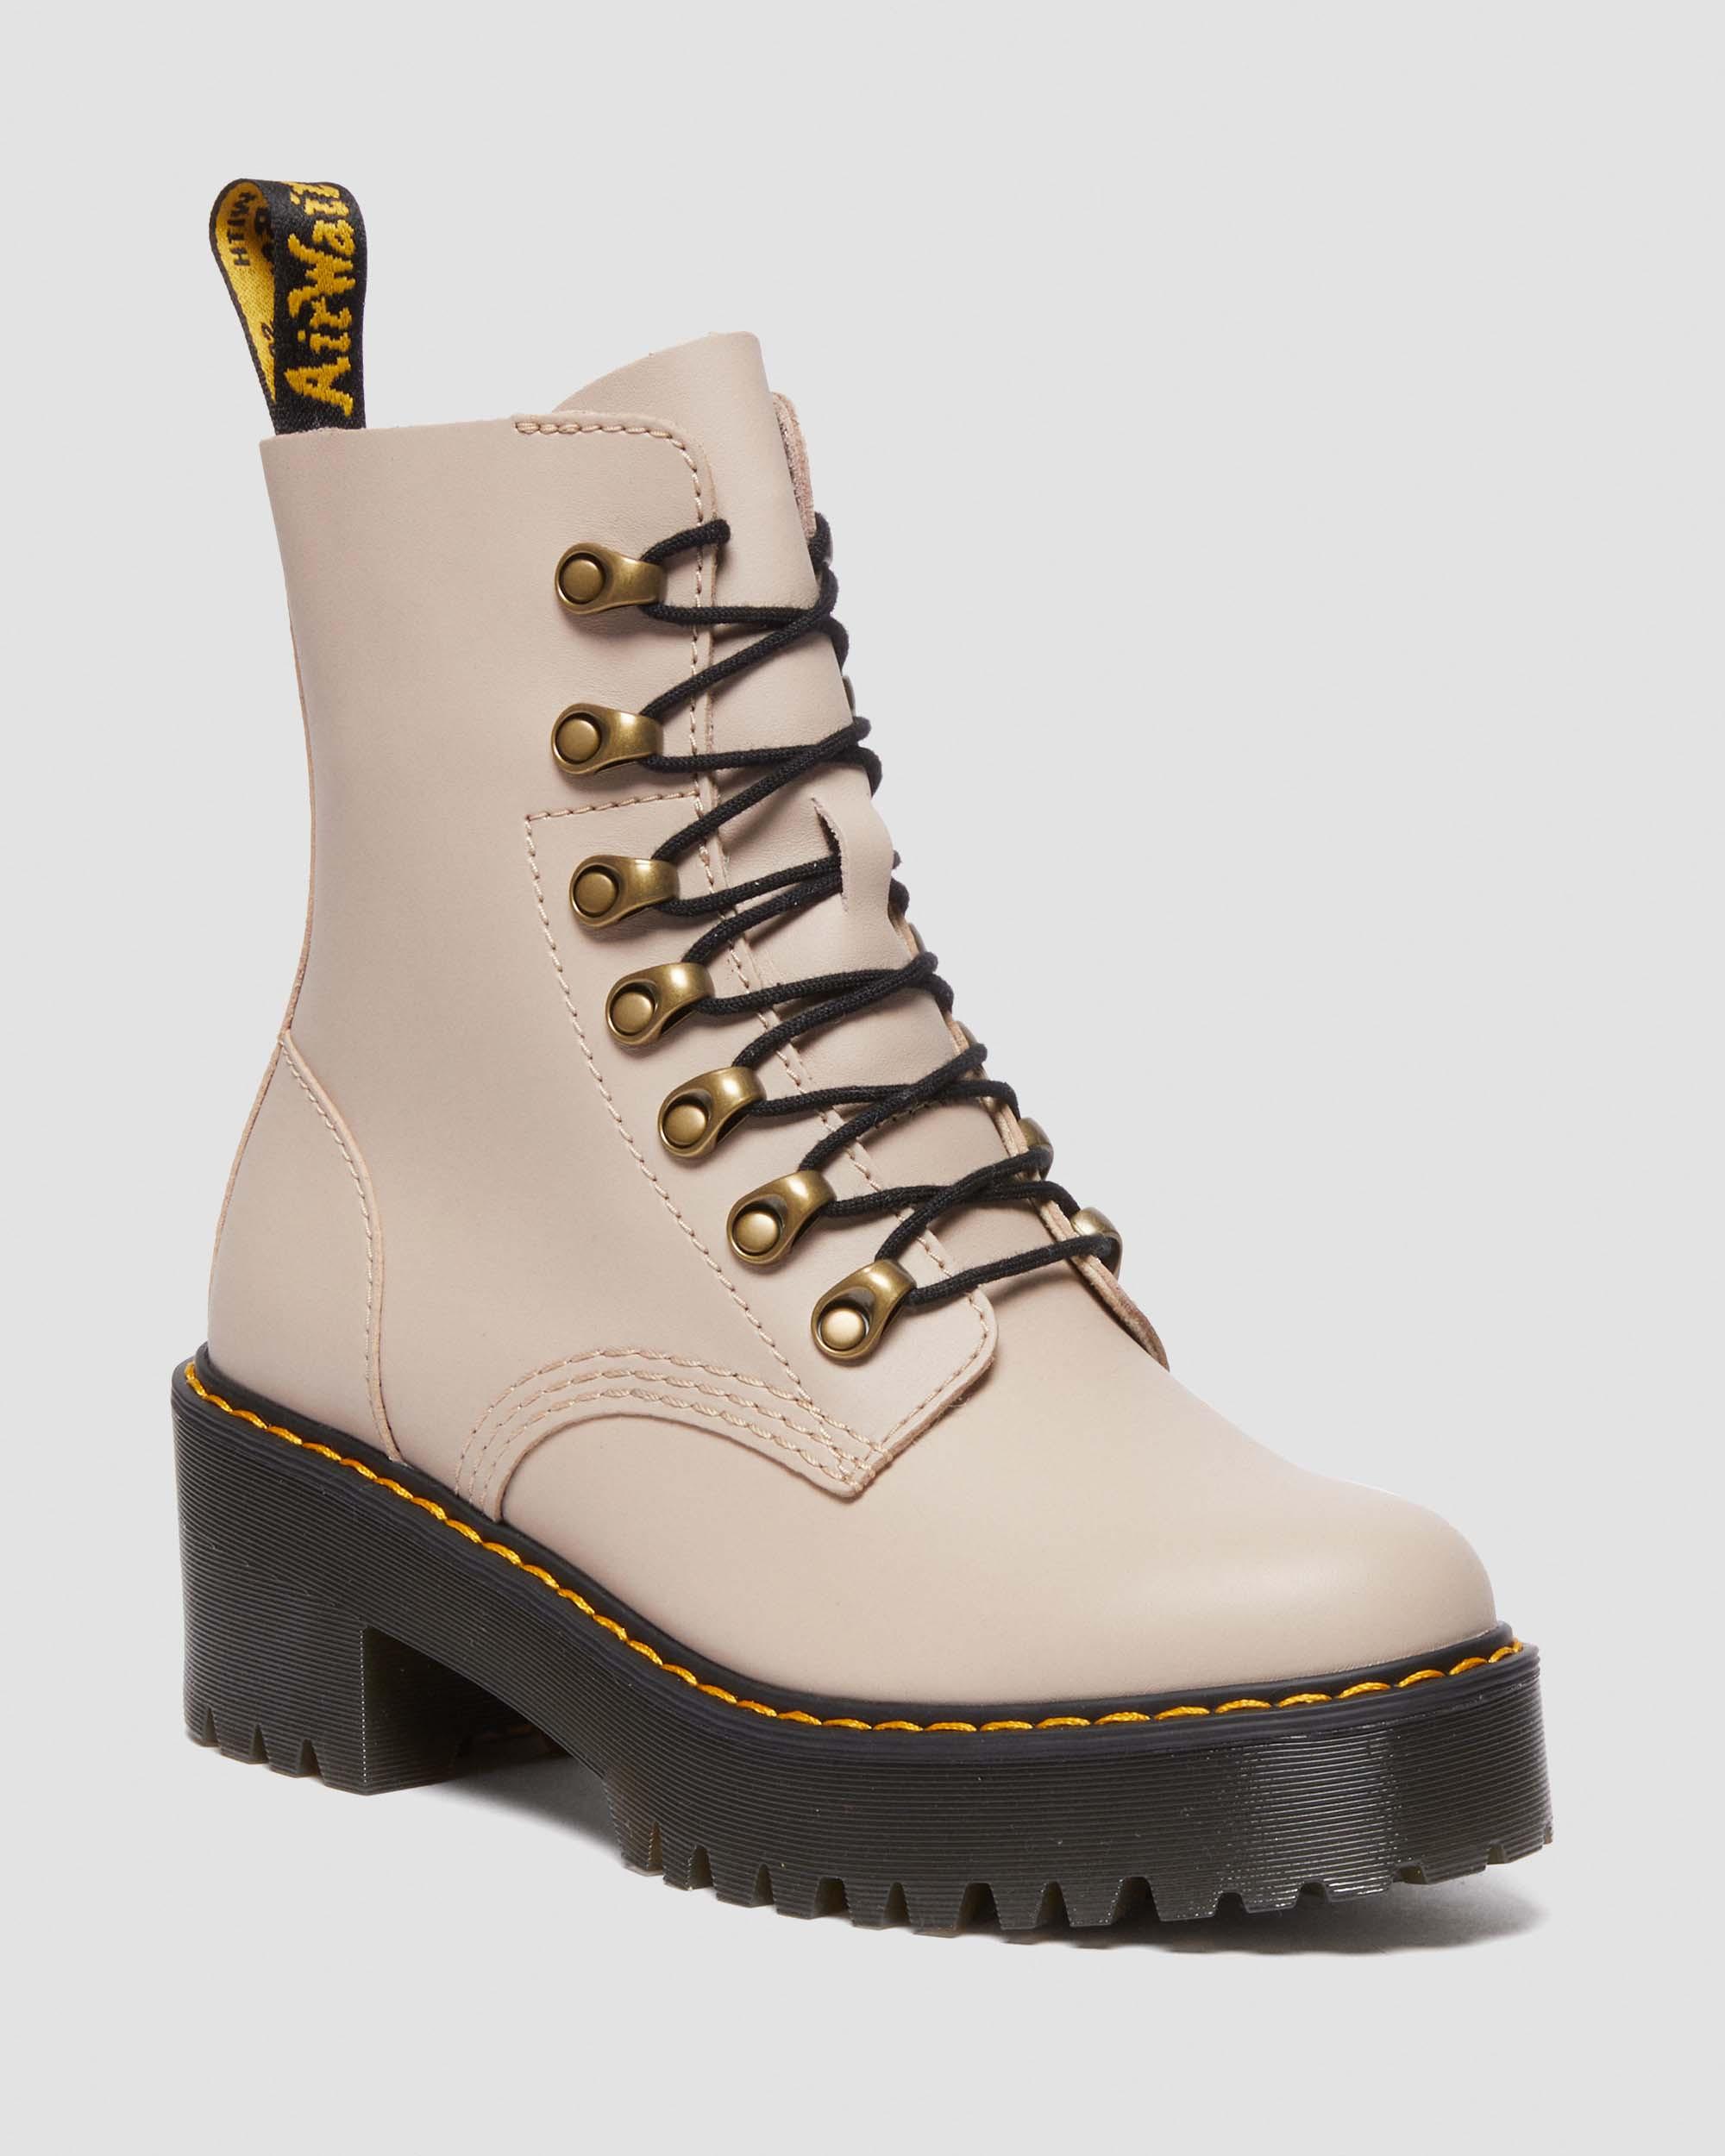 DR MARTENS Leona Women's Sendal Leather Heeled Boots